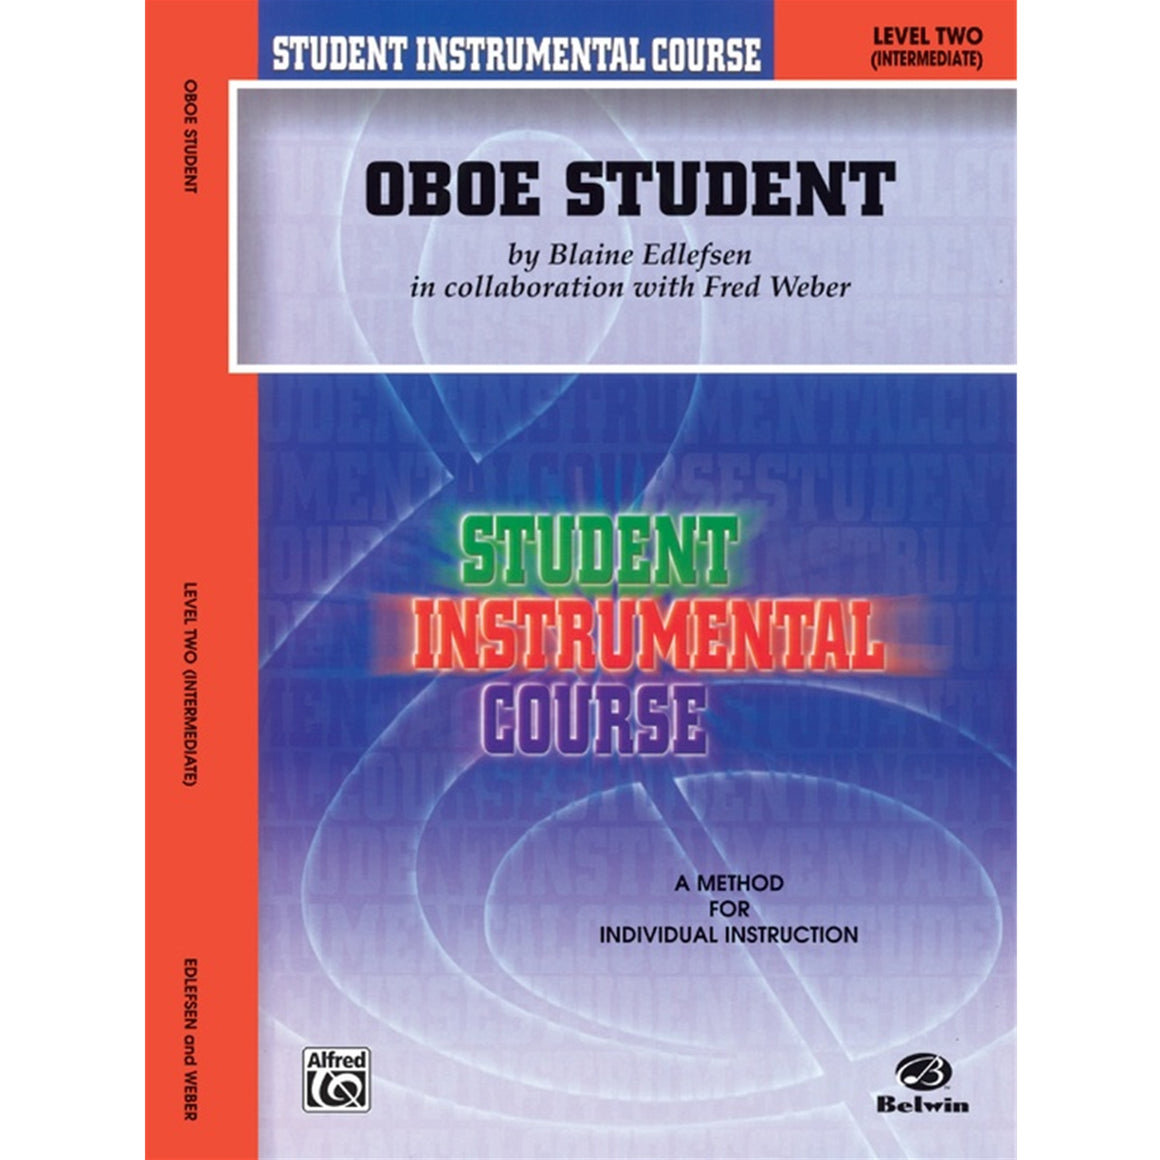 ALFRED SICOBOE2 Student Instrumental Course: Oboe Student, Level II [Oboe]